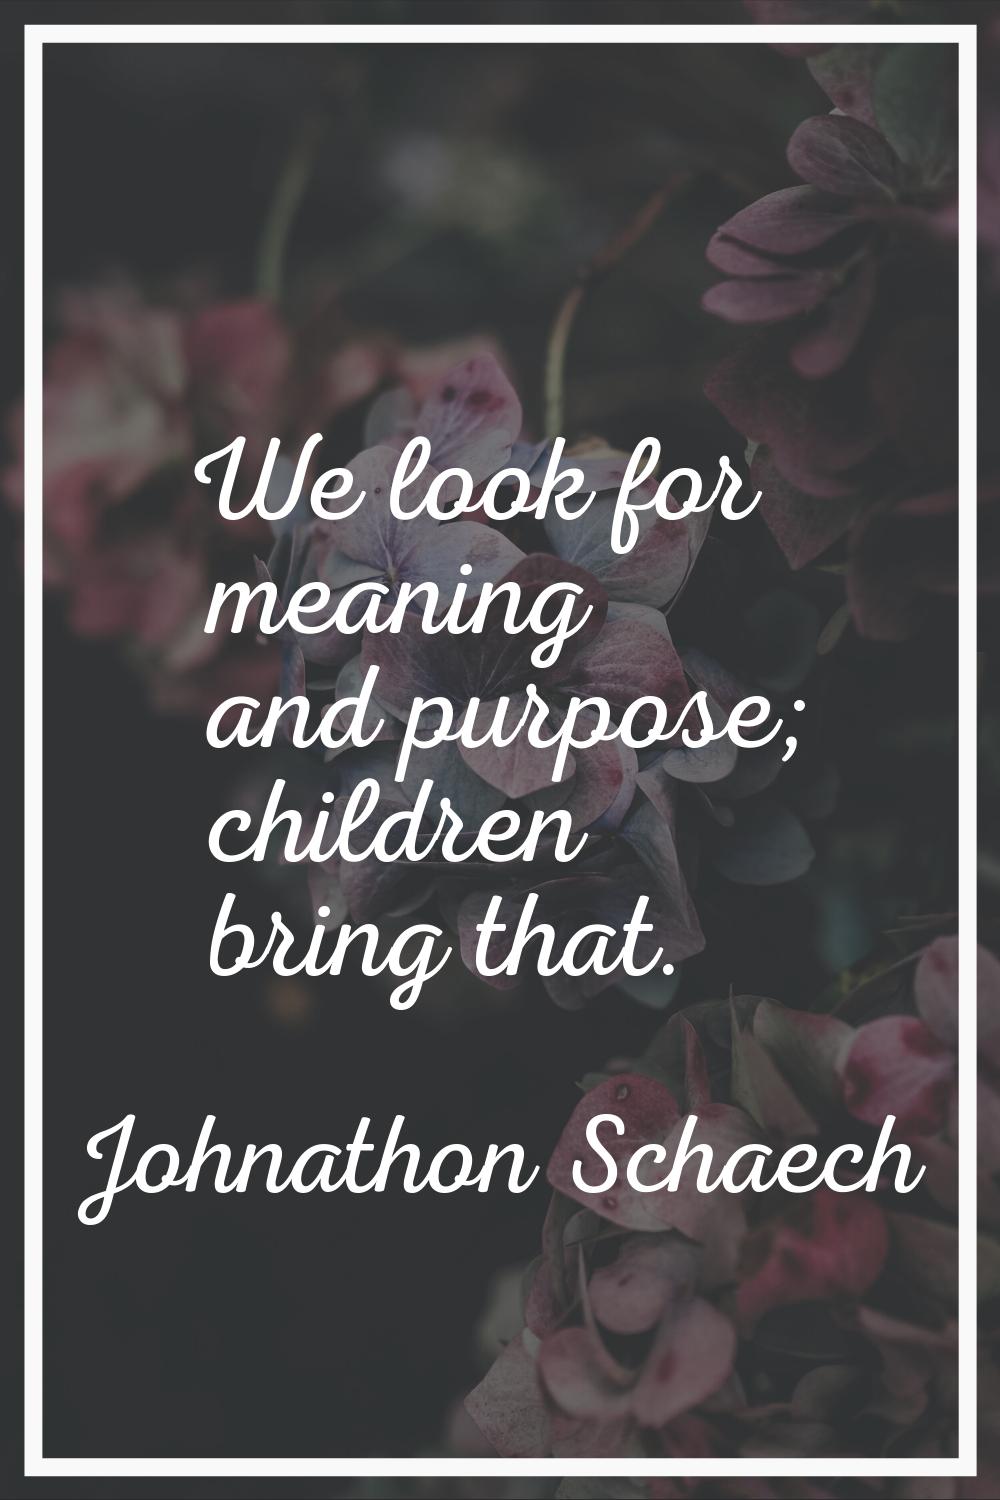 We look for meaning and purpose; children bring that.